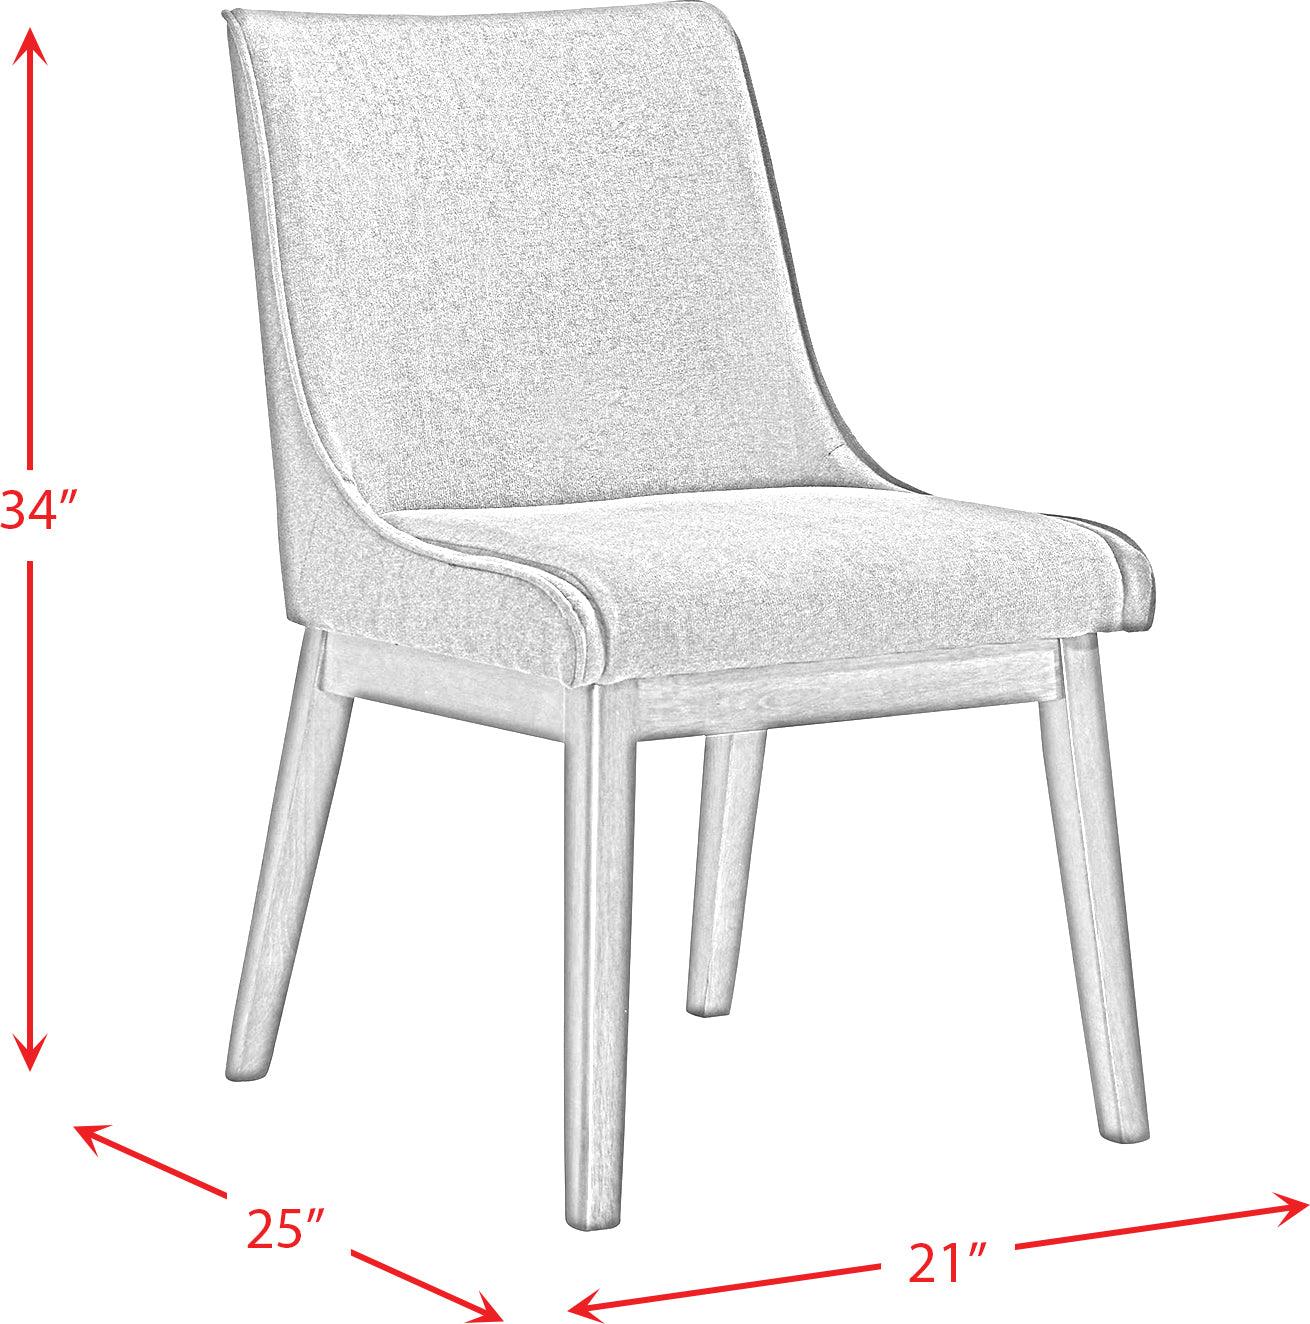 Elements Dining Chairs - Ronan Standard Height Arm Chair Set (Set of 2)